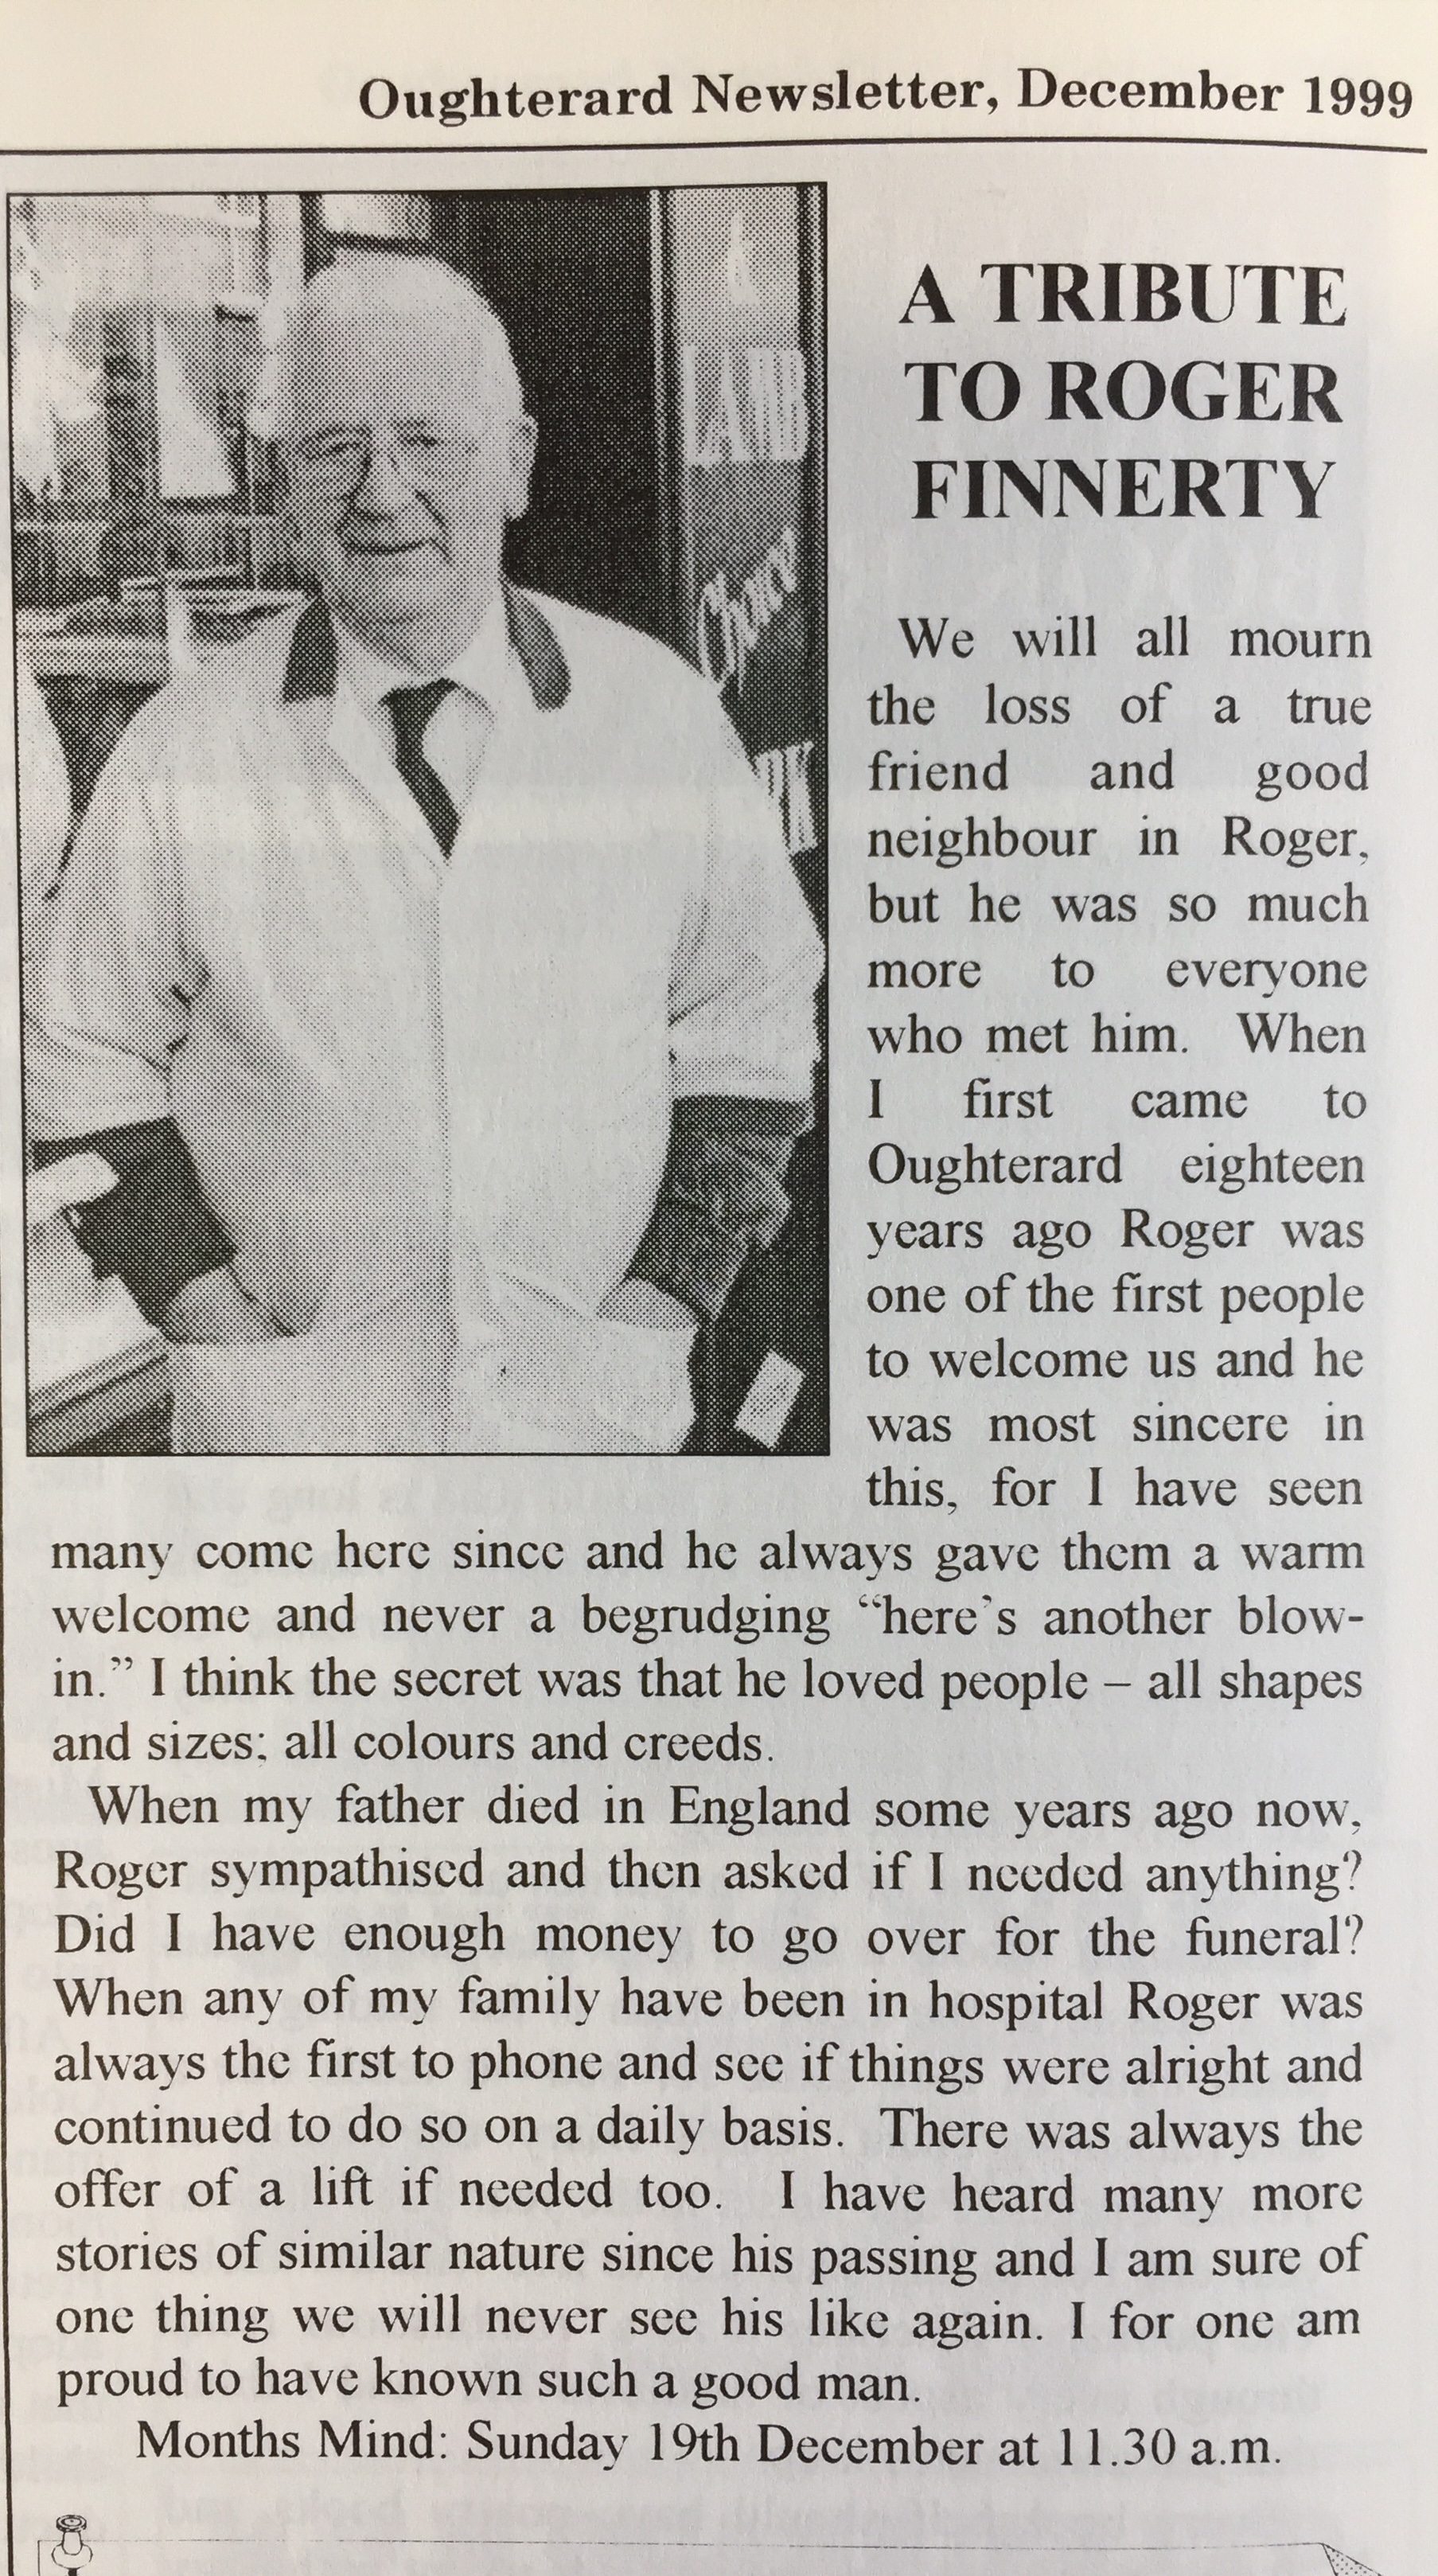 A Tribute to Roger Finnerty